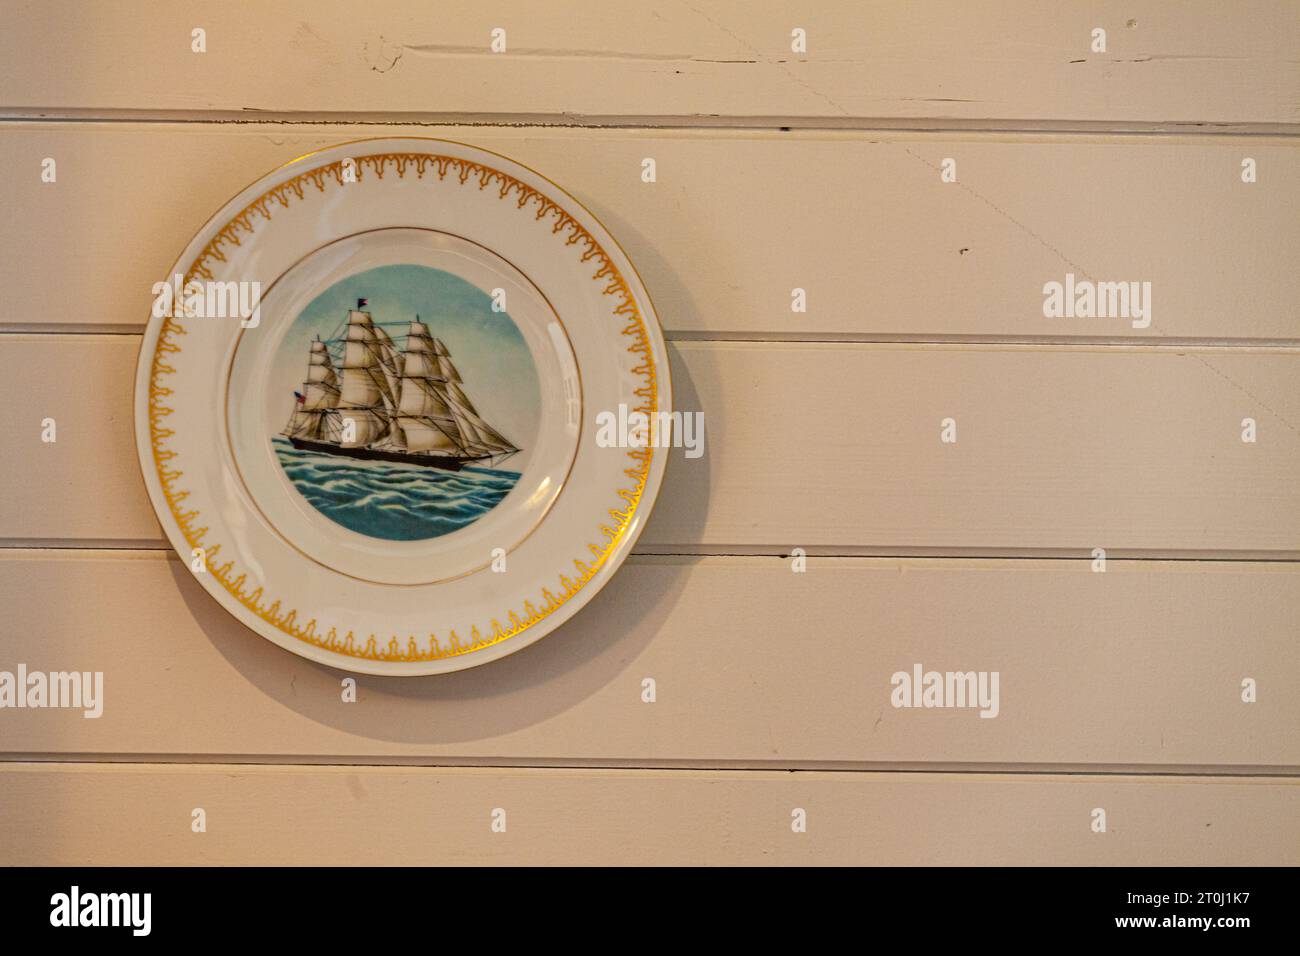 Decorative plate hanging on a painted wooden interior wall in Steveston British Columbia Canada Stock Photo